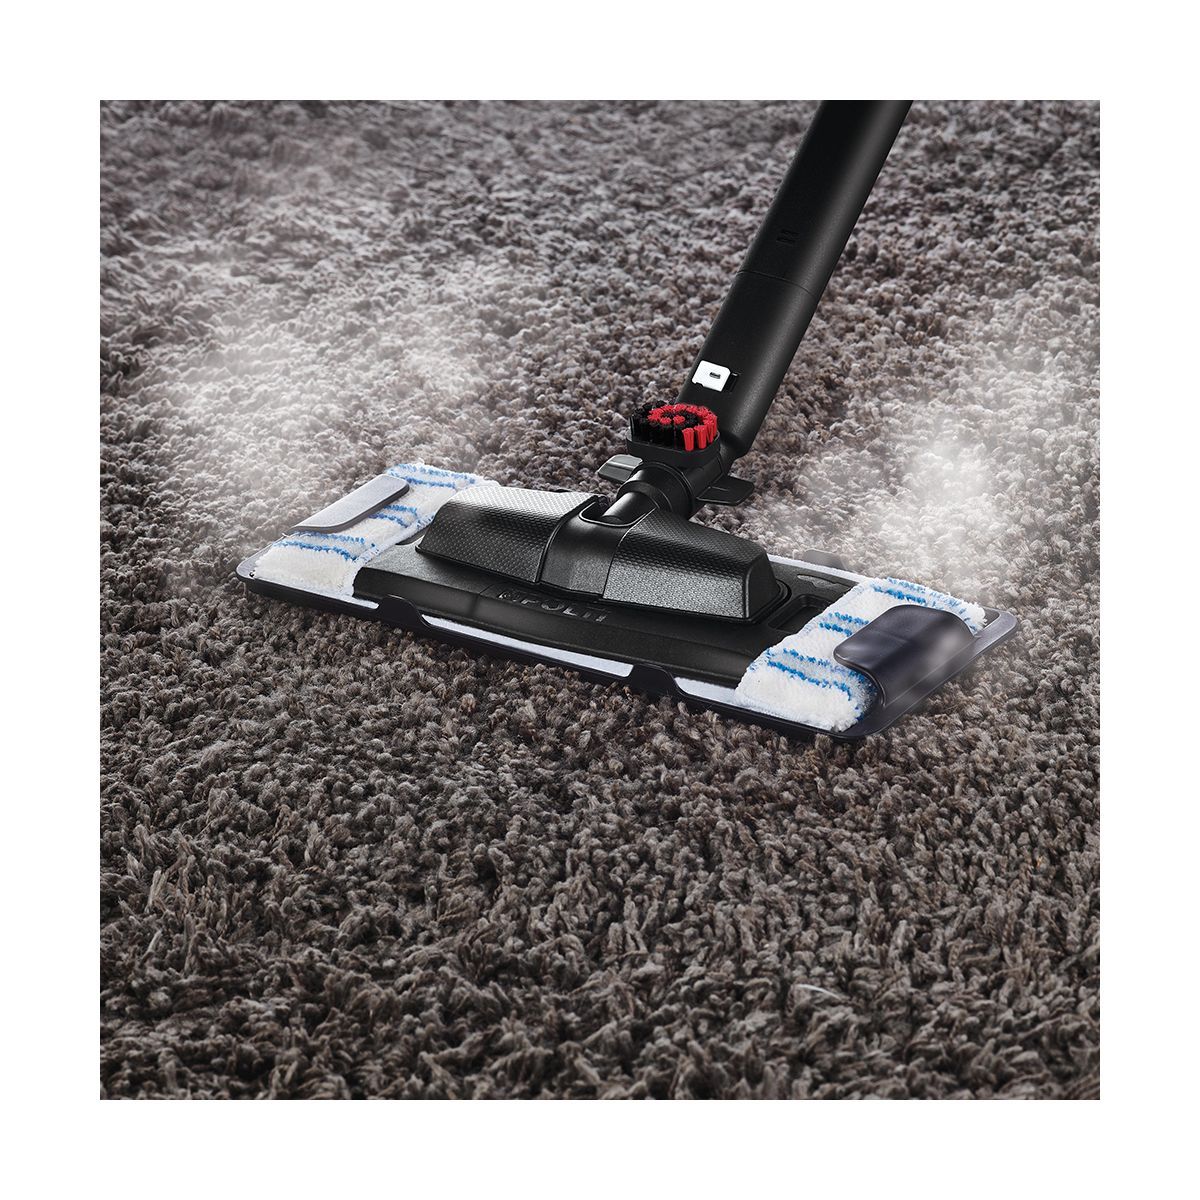 Polti Vaporetto Pro 100_Eco Power steam cleaner with Eco function